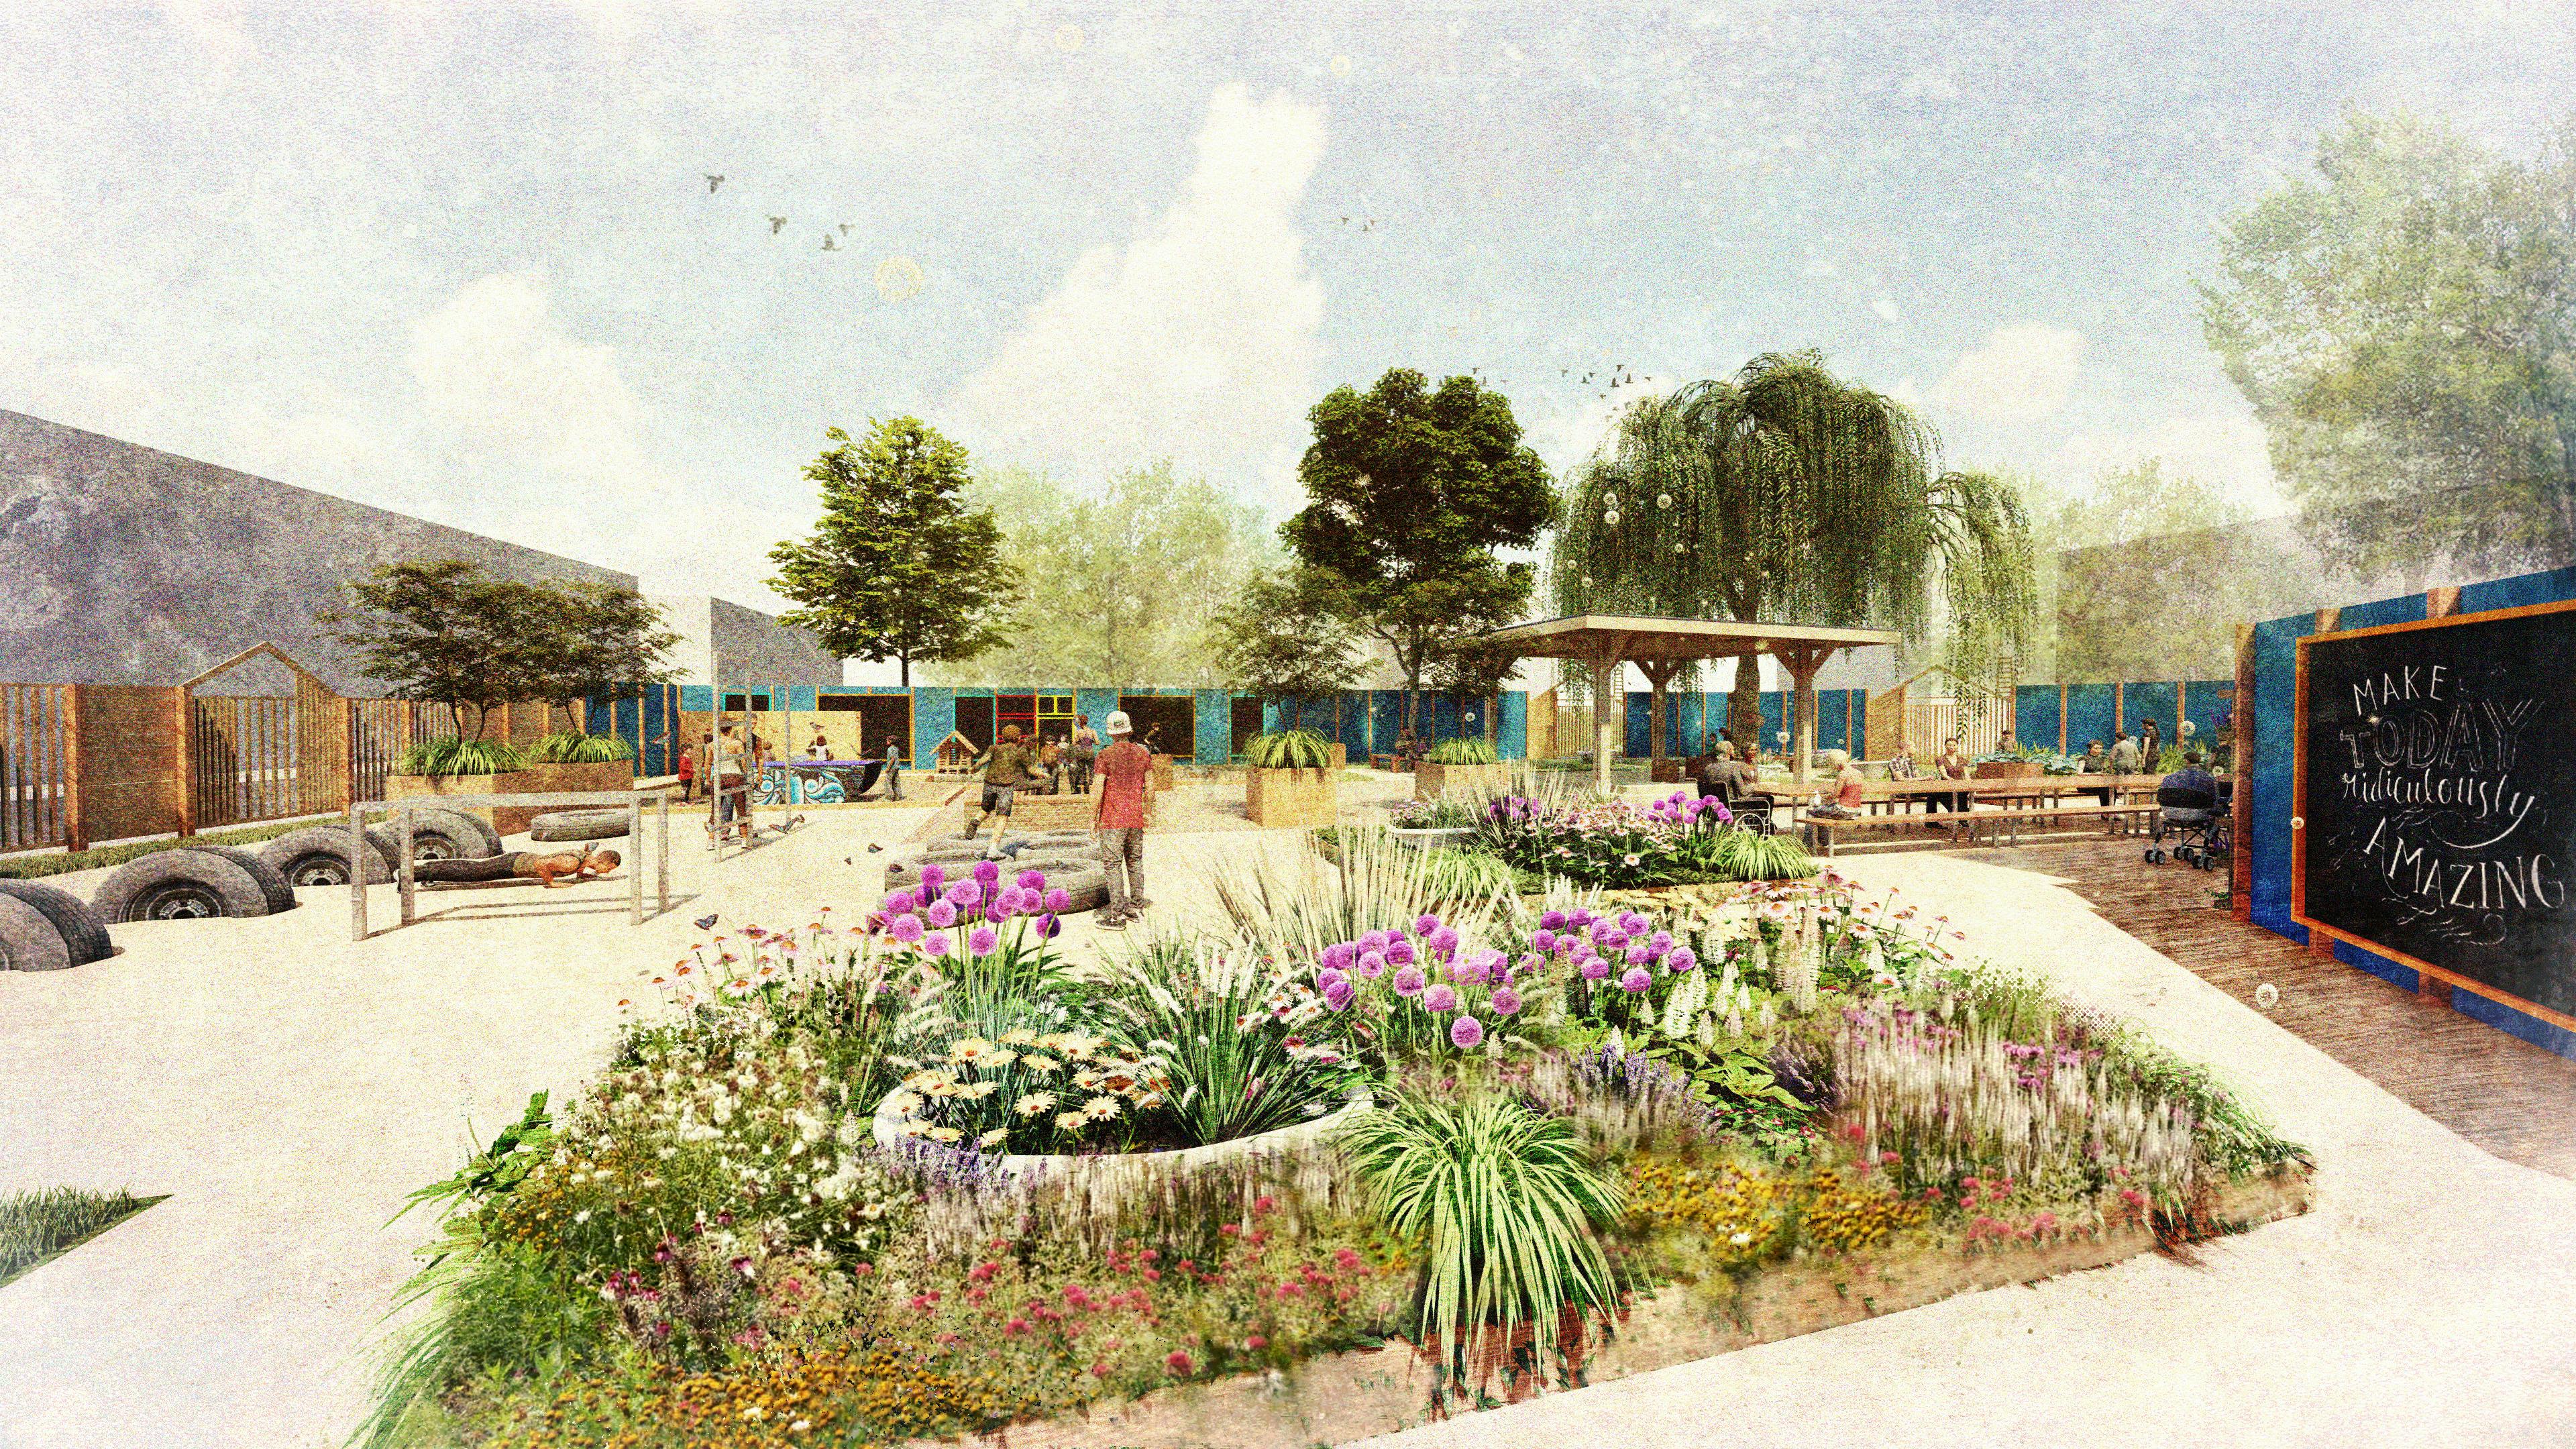 Artists' impression of the park